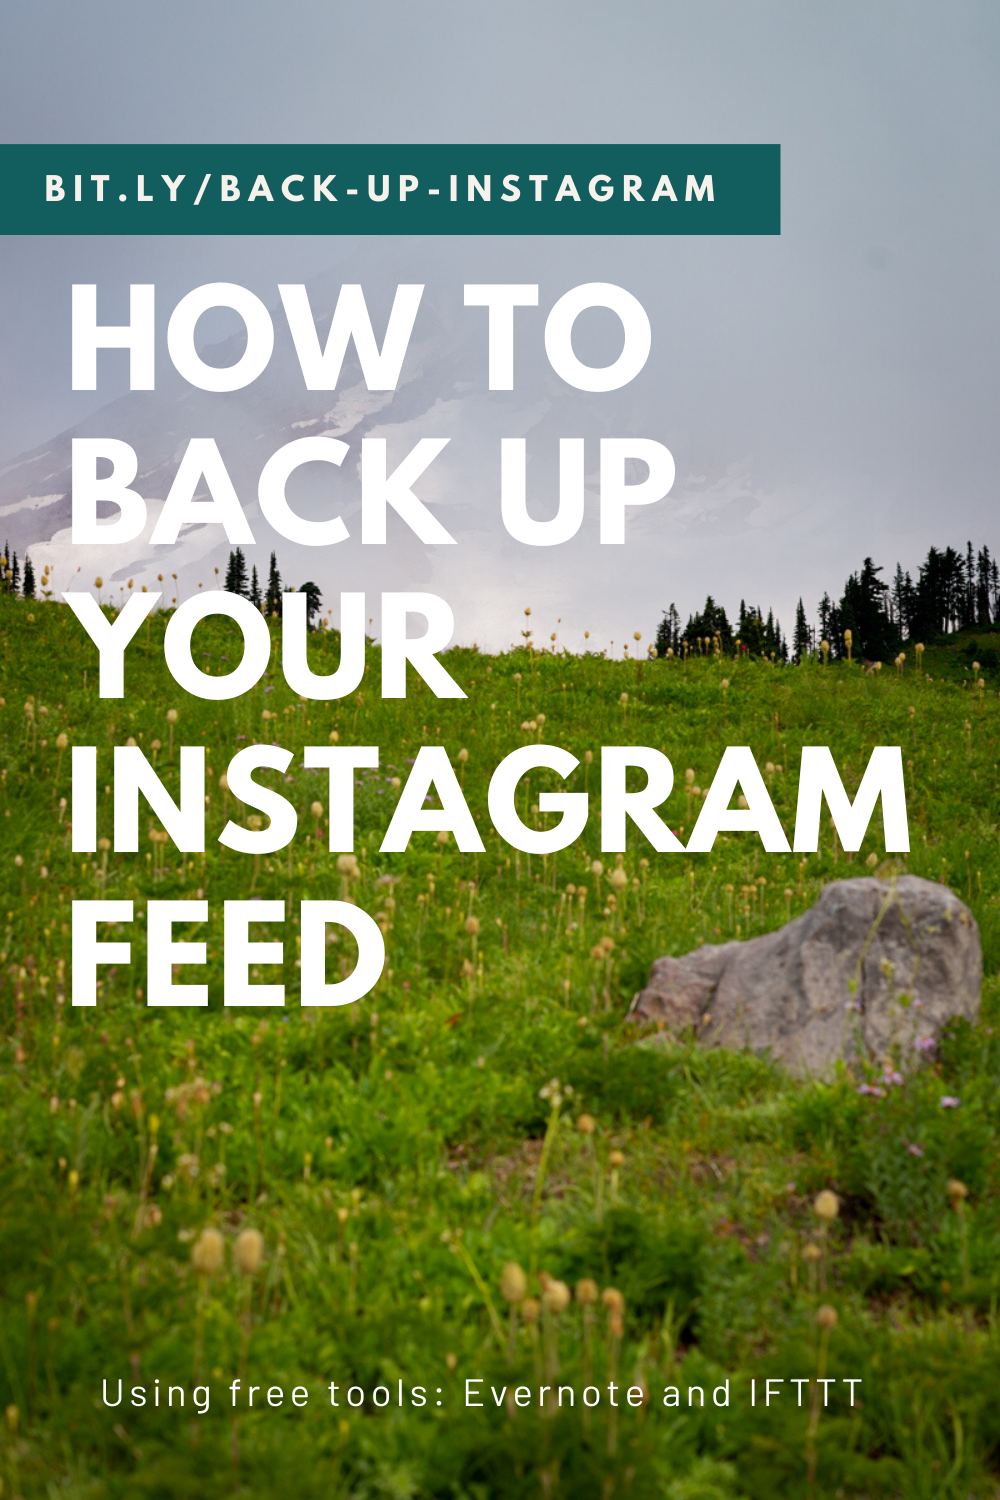 Bold white text says, "How to back up your Instagram feed" on top of a photo of a snow-capped mountain and field full of wildflowers.